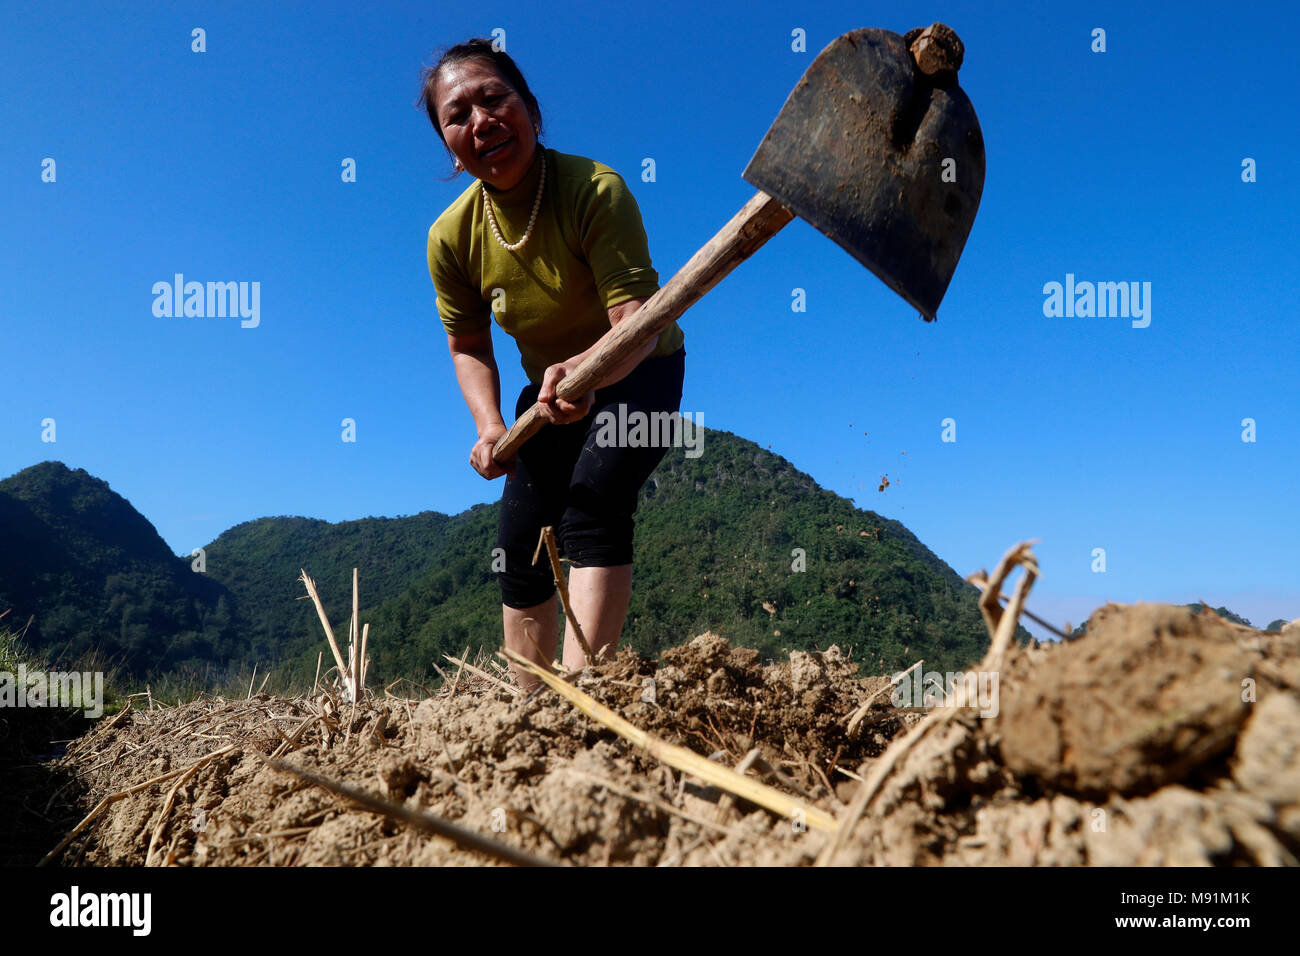 Rural life.  Vietnamese woman digging soil with hoe in field. Bac Son. Vietnam. Stock Photo